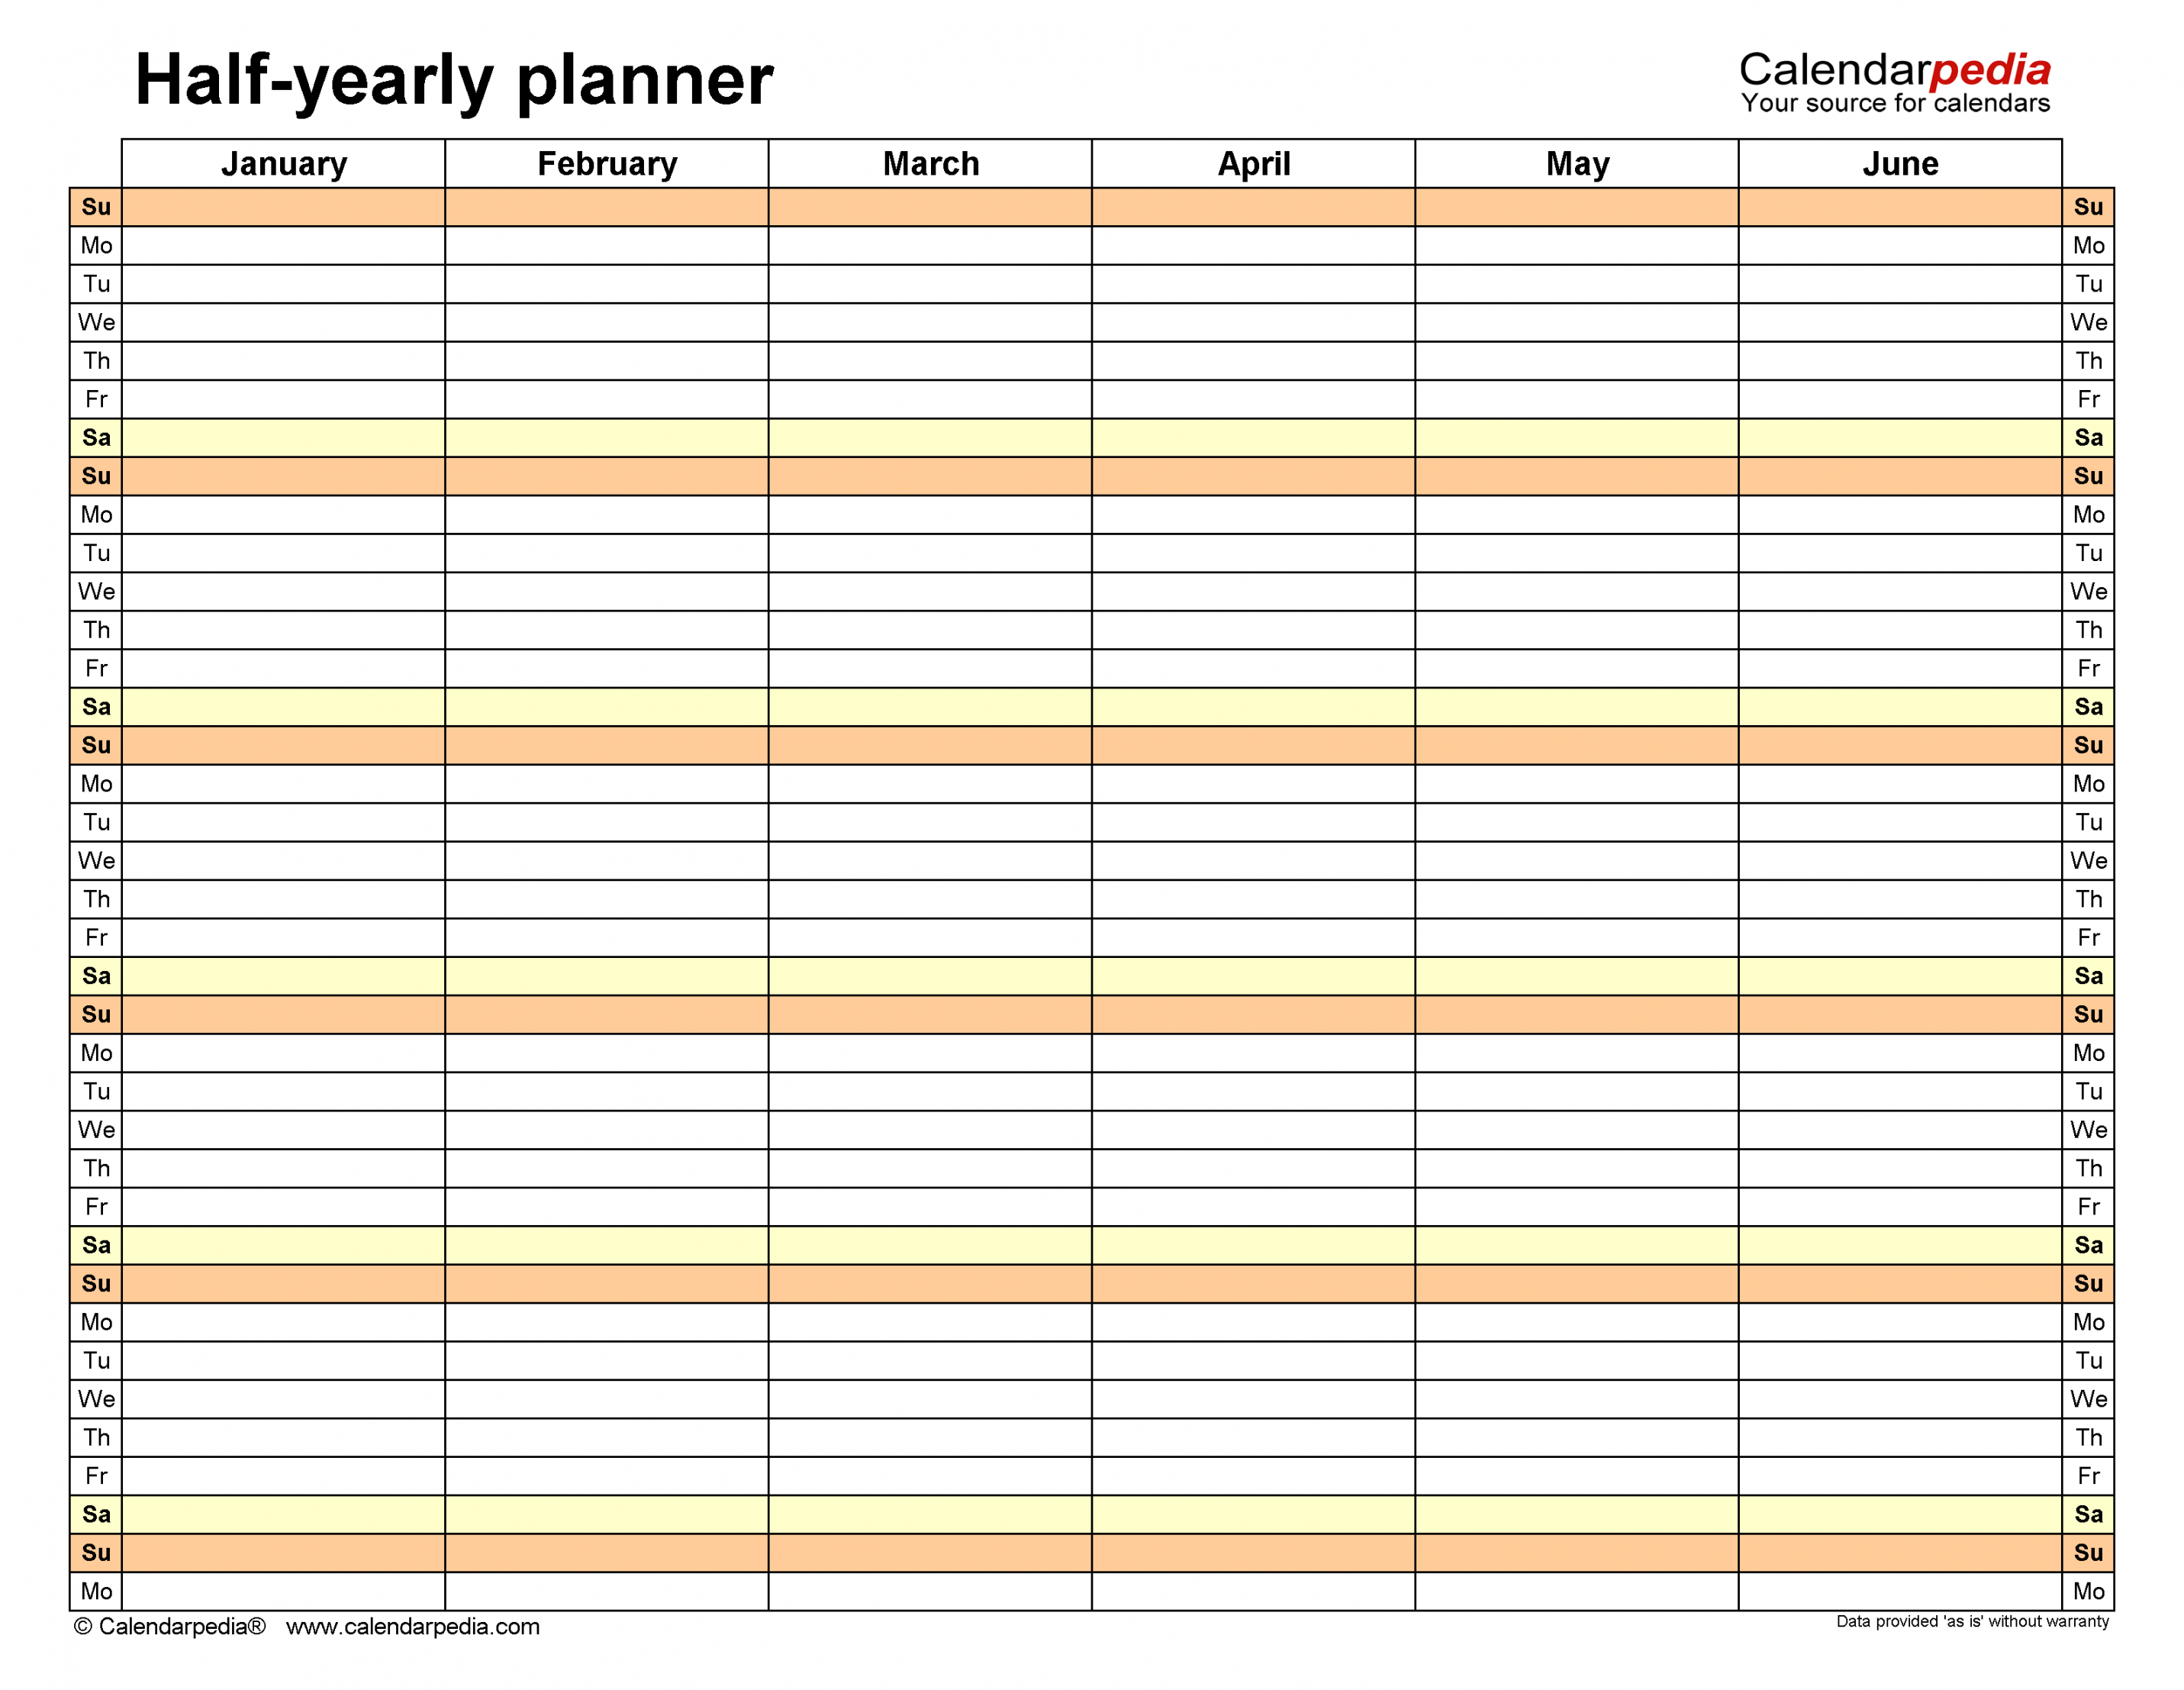 Free Yearly Planners in PDF Format -  Templates